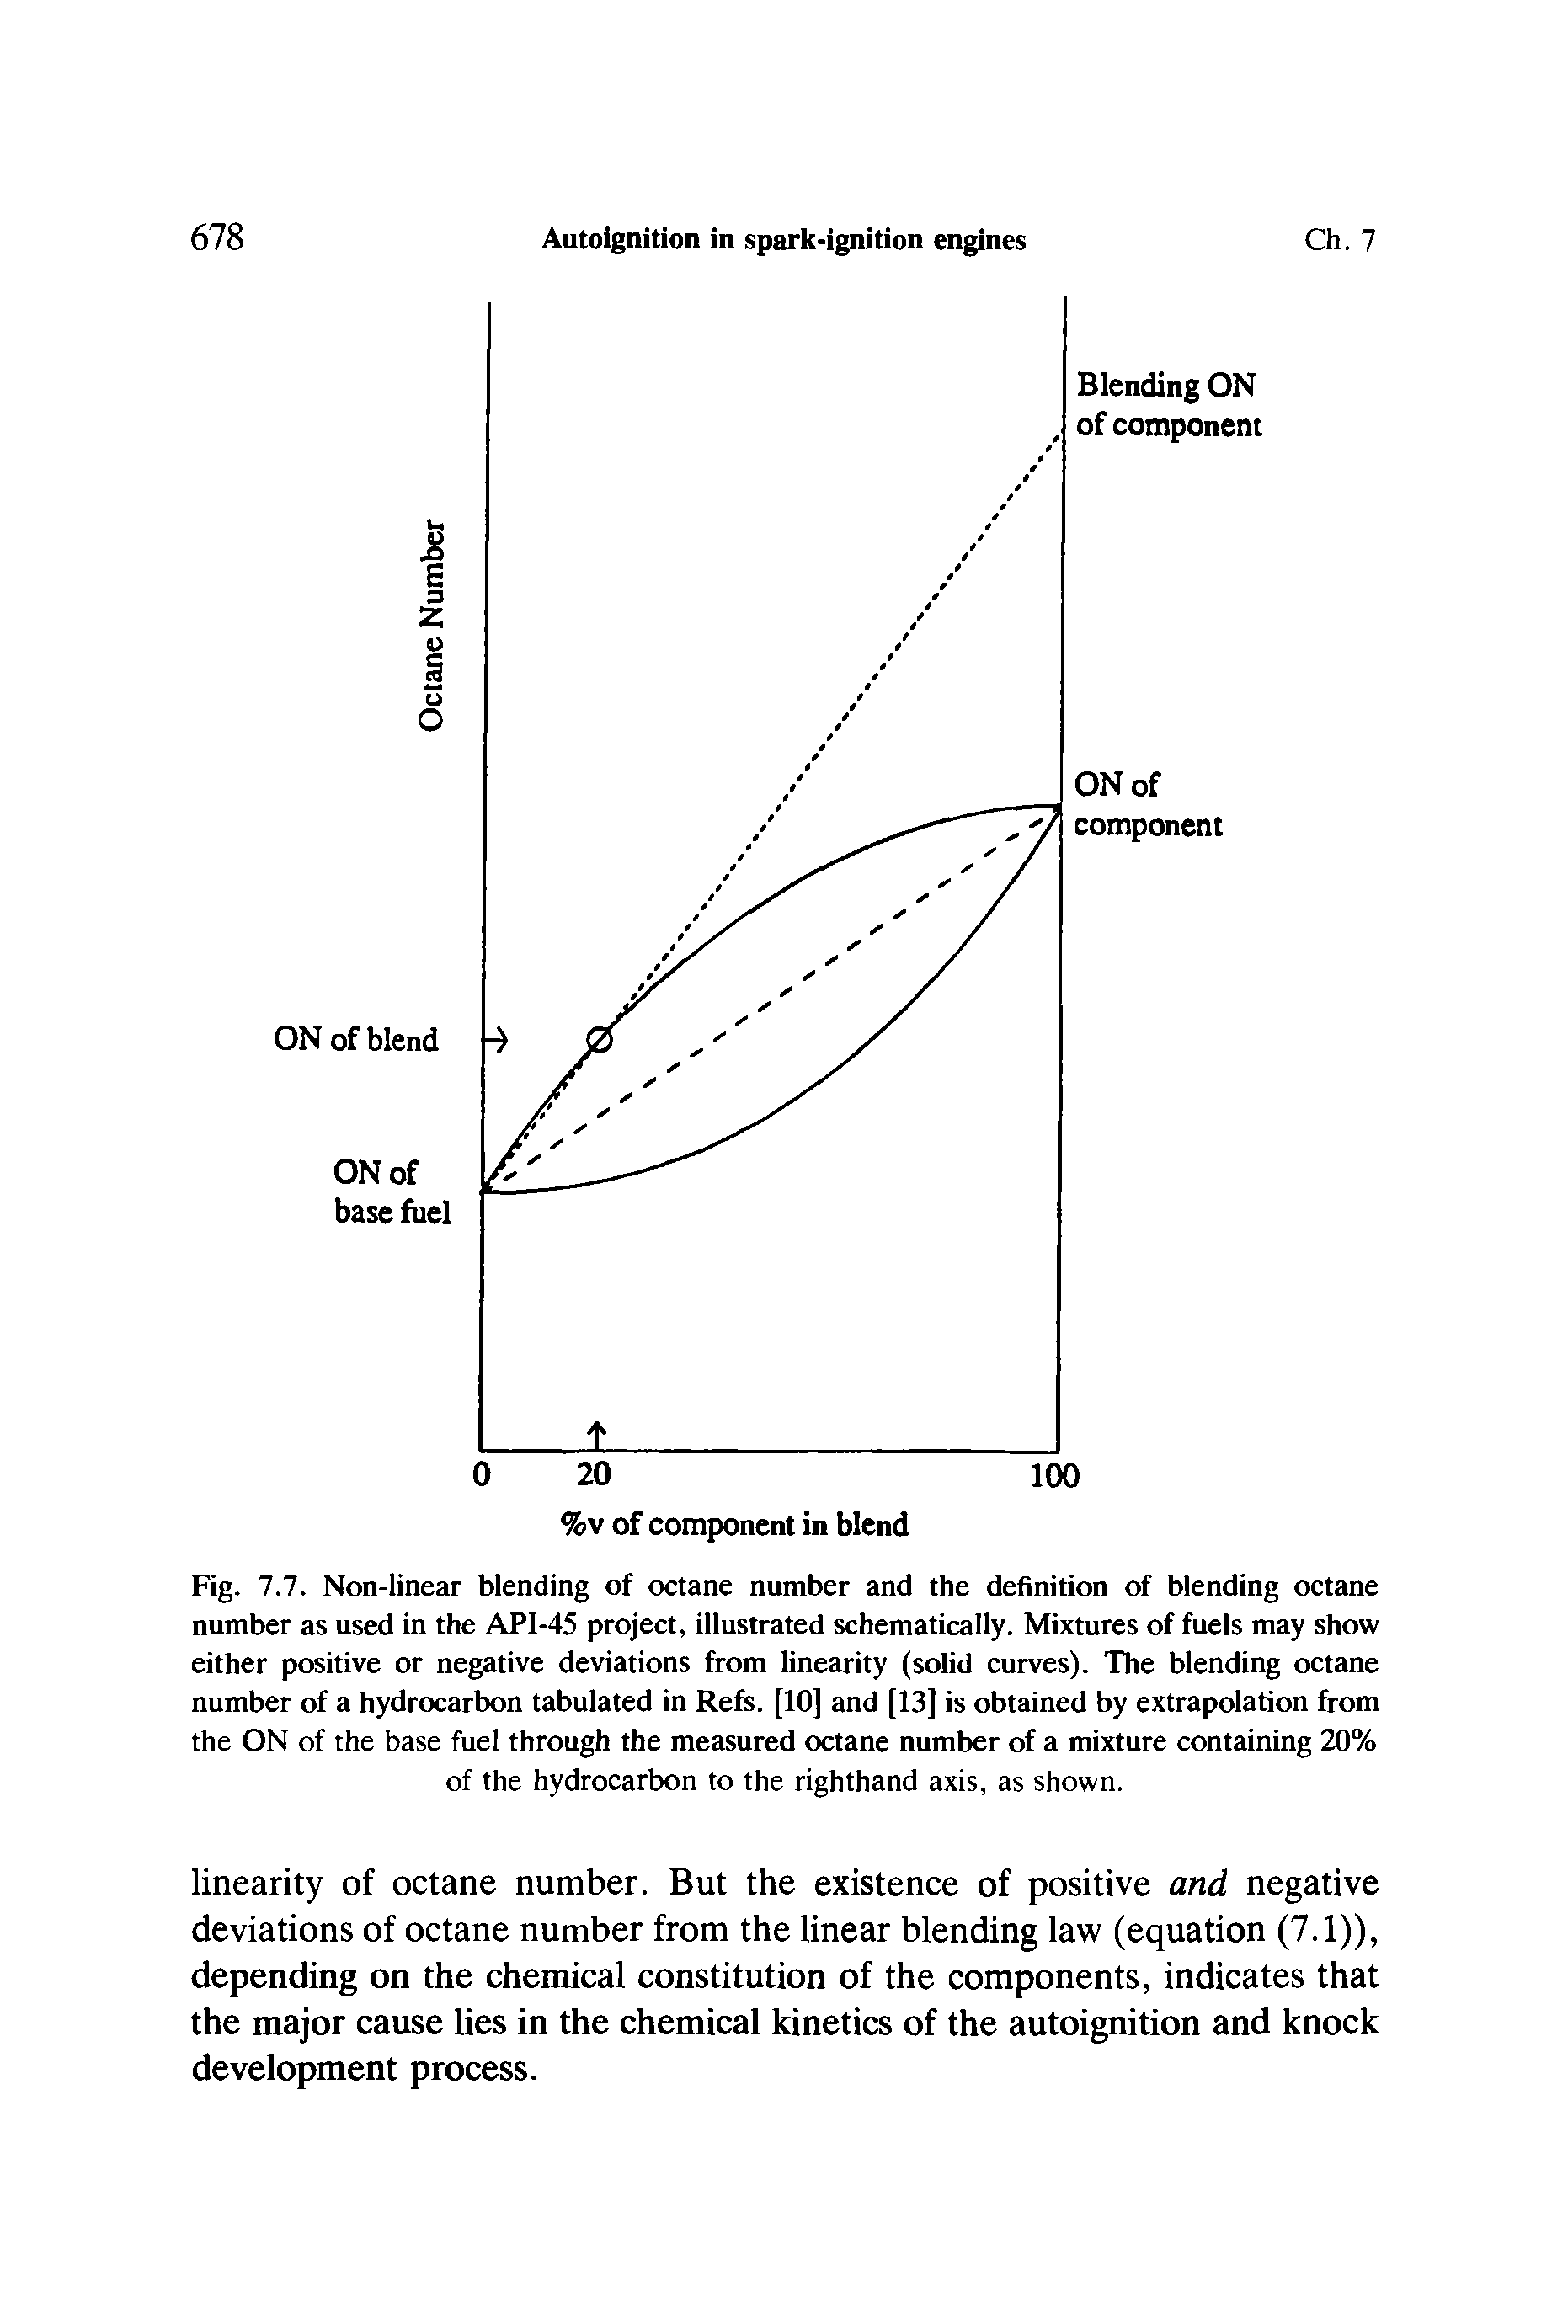 Fig. 7.7. Non-linear blending of octane number and the definition of blending octane number as used in the API-45 project, illustrated schematically. Mixtures of fuels may show either positive or negative deviations from linearity (solid curves). The blending octane number of a hydrocarbon tabulated in Refs. [10] and [13] is obtained by extrapolation from the ON of the base fuel through the measured octane number of a mixture containing 20% of the hydrocarbon to the righthand axis, as shown.